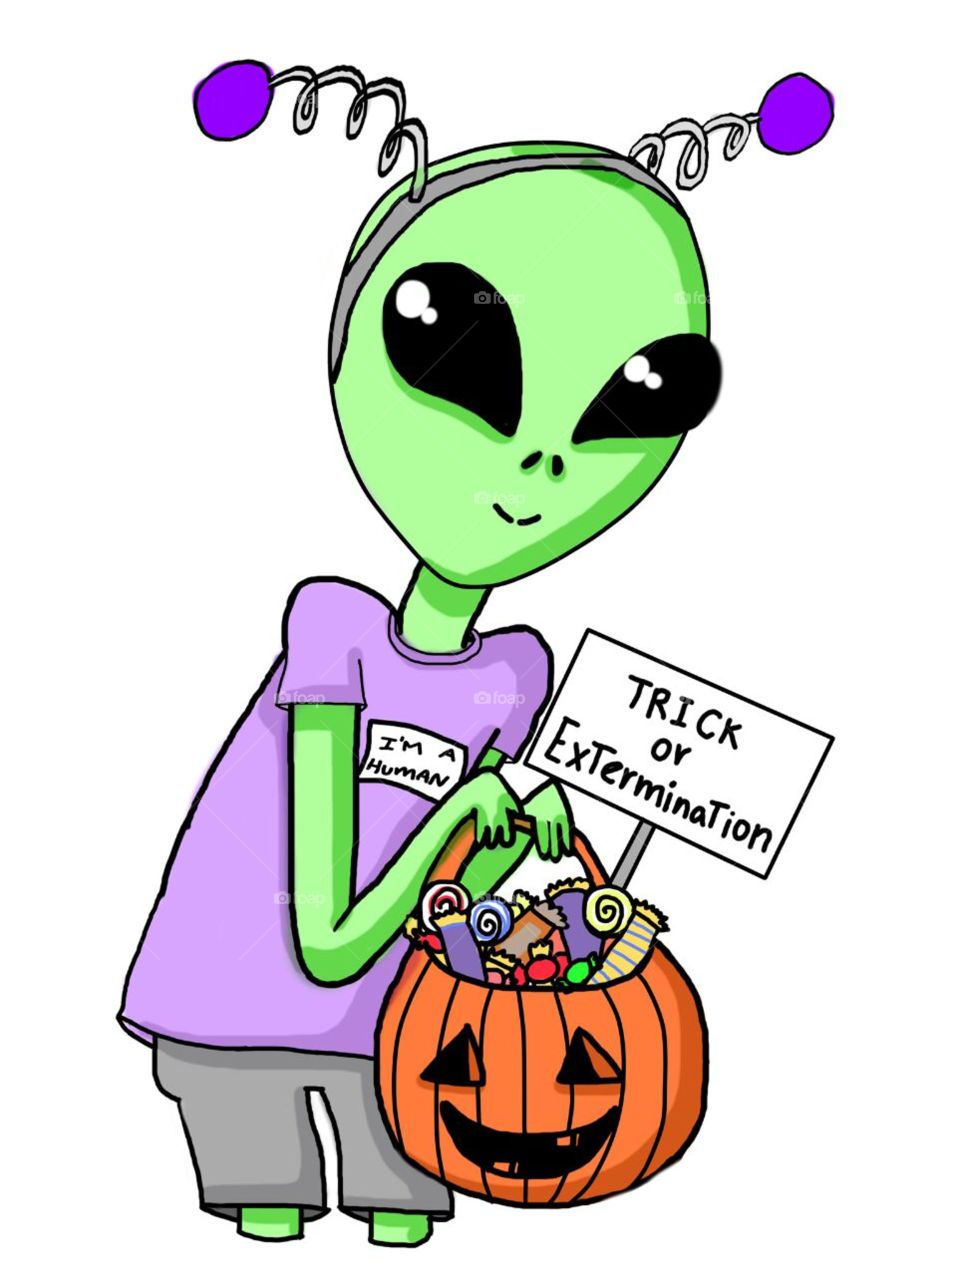 #Trick Or Extermination